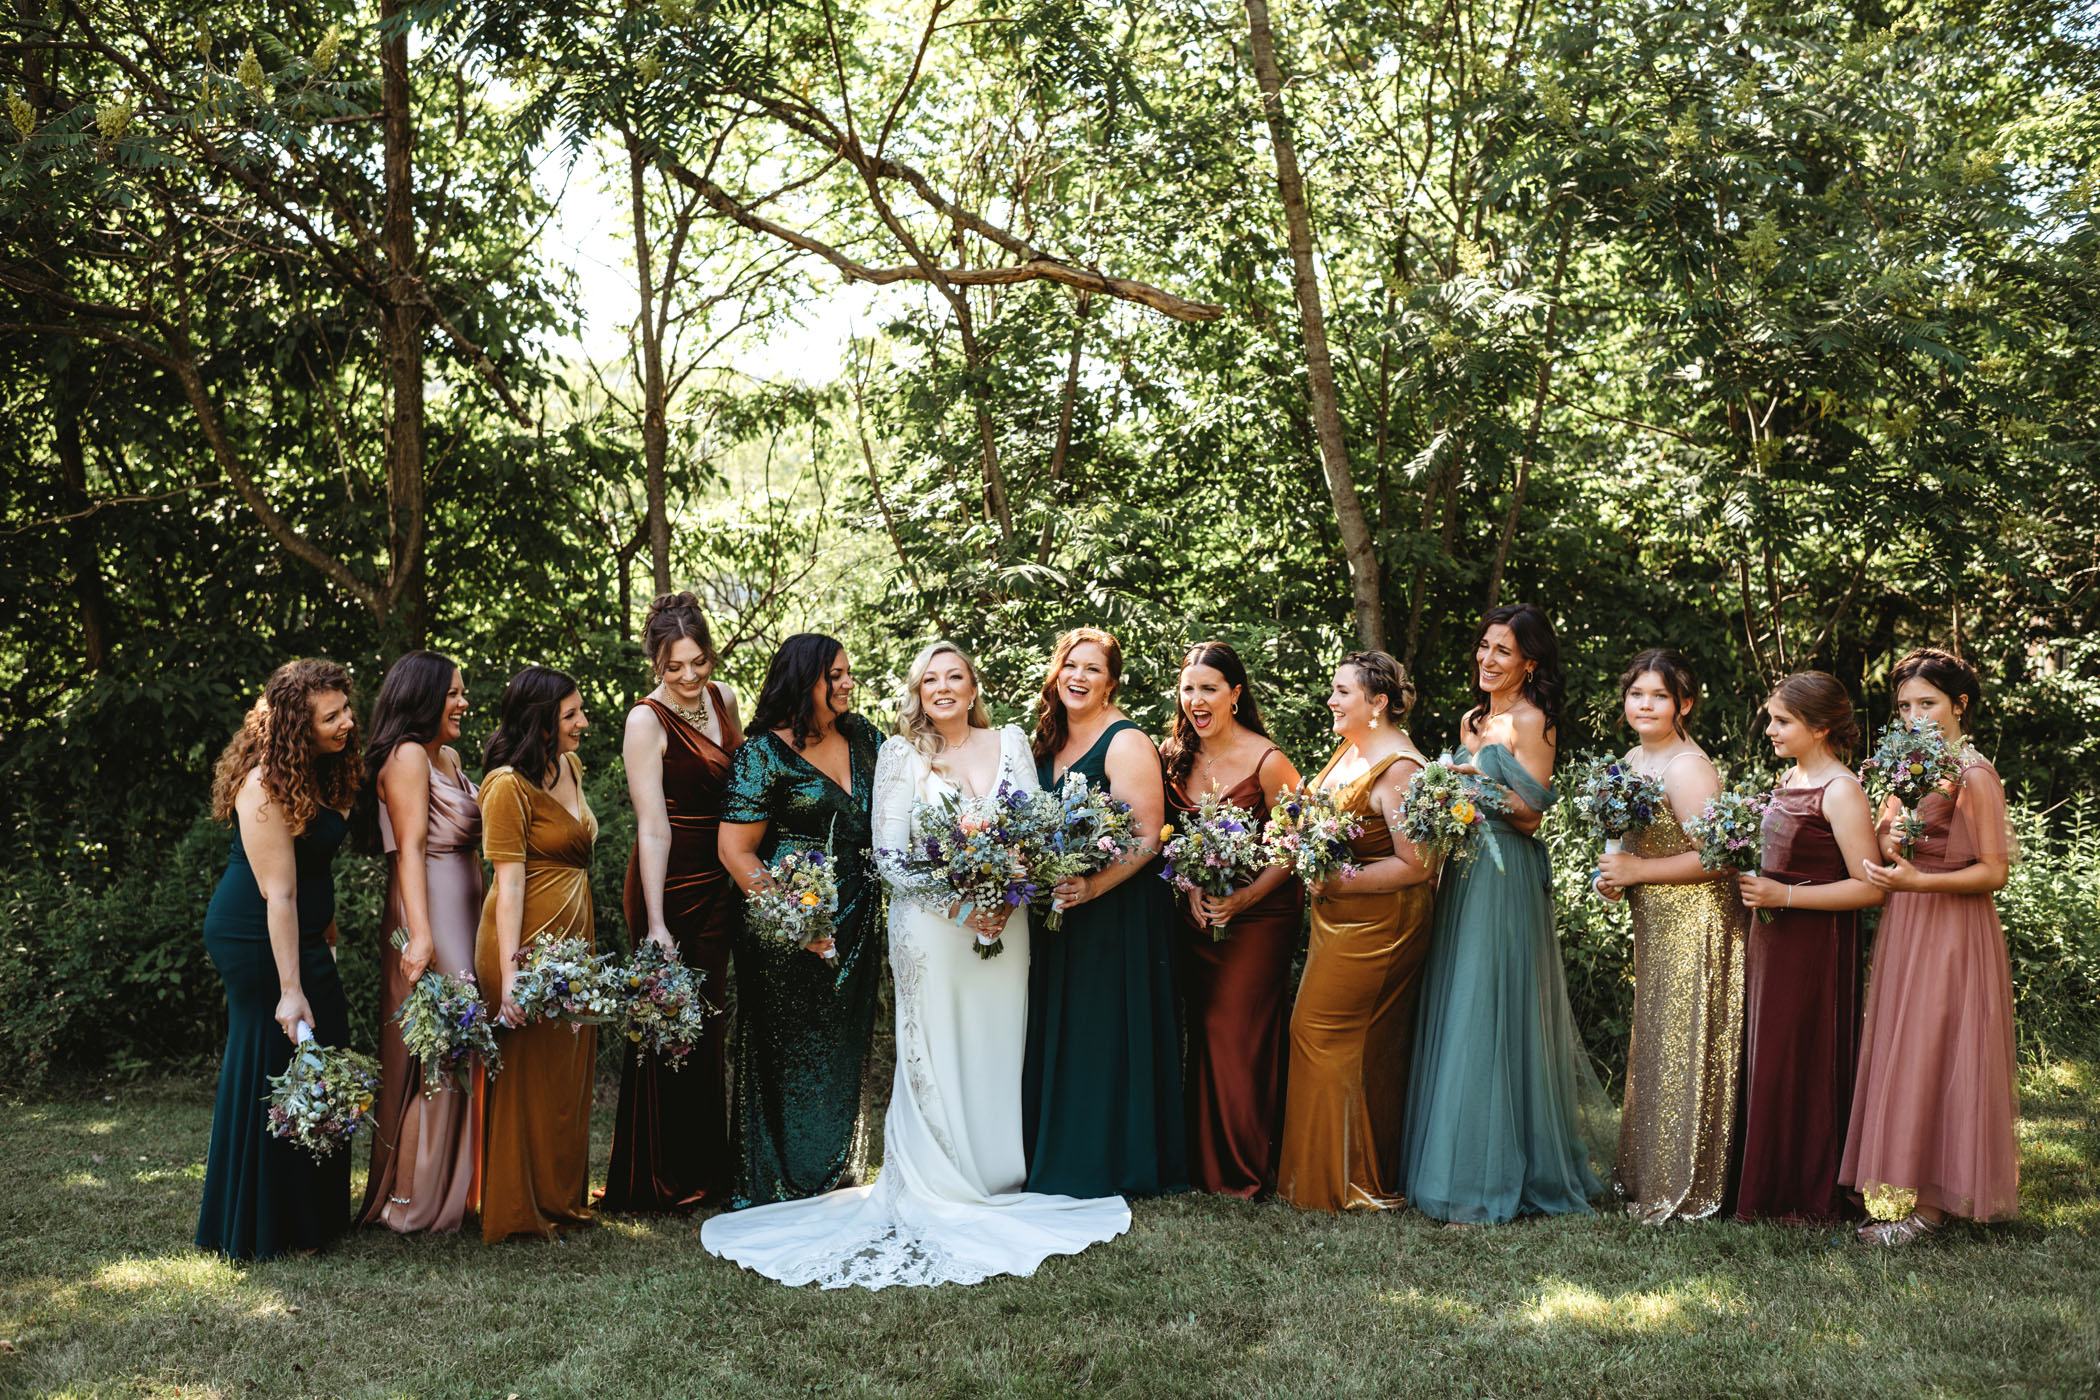 Eclectic 70s Inspired Get Down on a Farm Wedding